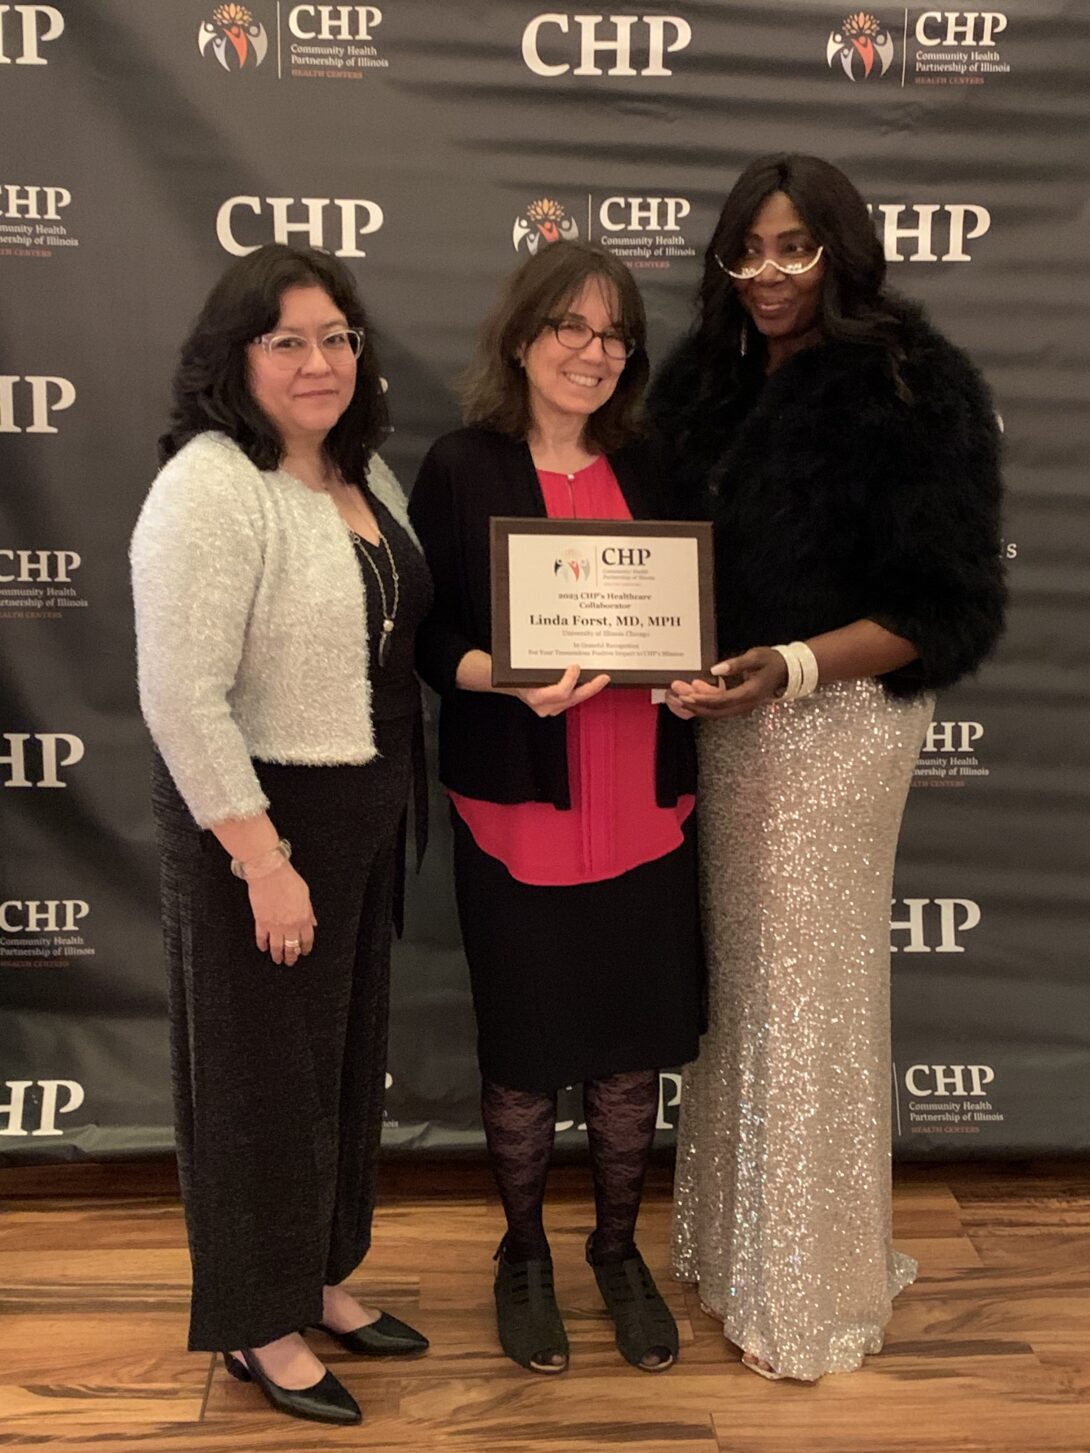 Director of the Great Lakes Center for Farmworker Health and Wellbeing receives an award from the Executive Director of Community Health Partnerships of Illinois for her longstanding work with farmworkers.